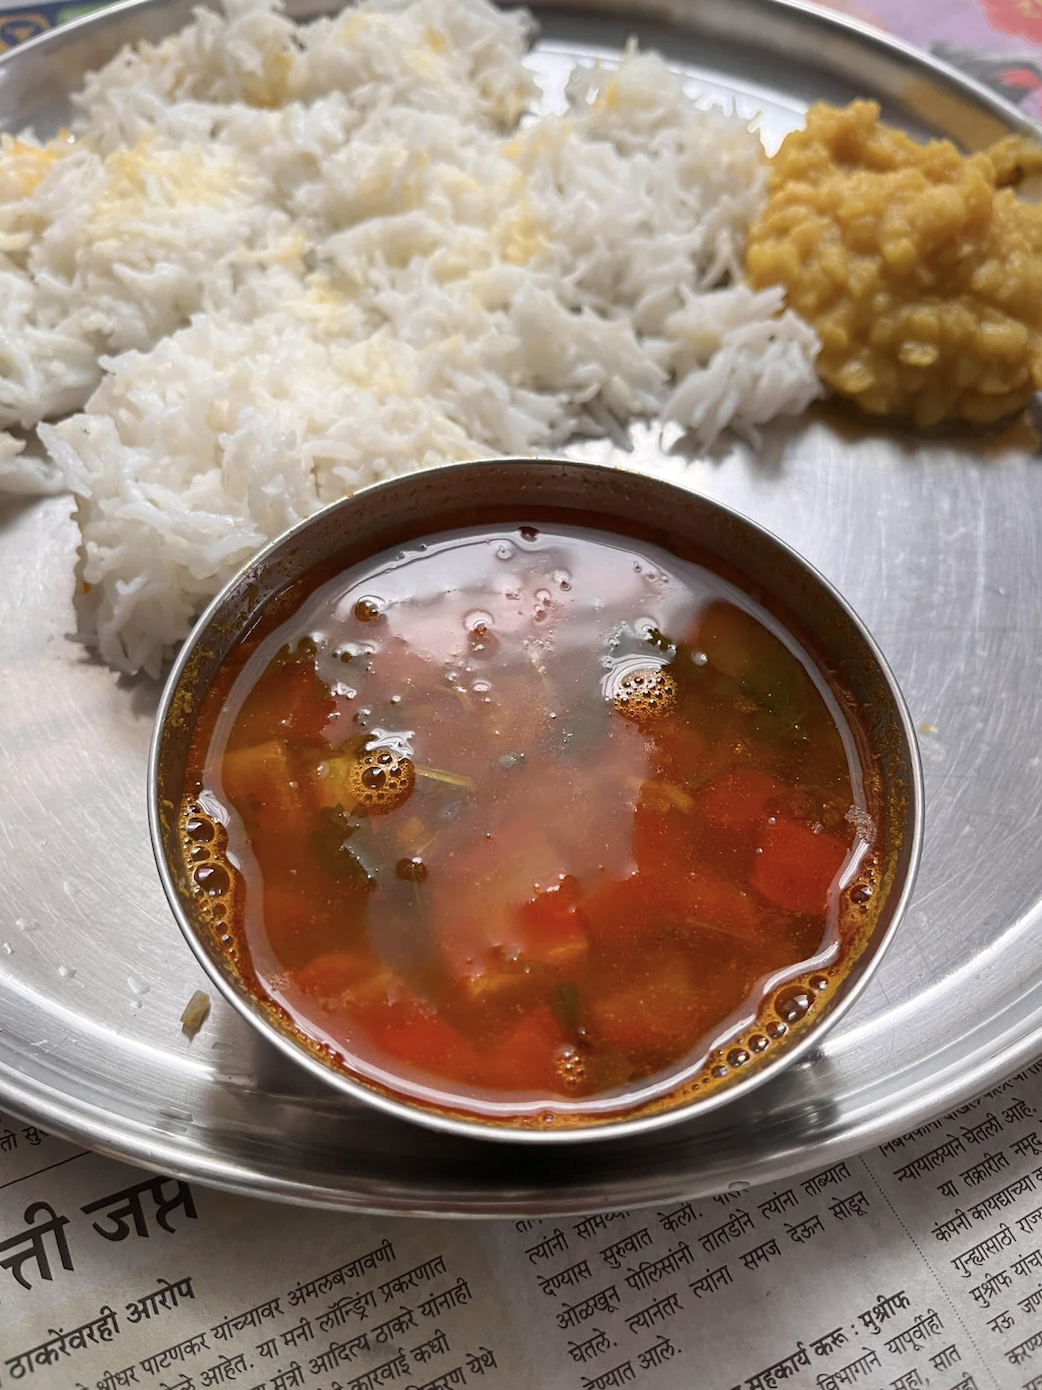 A bowl of clear soup with vegetables beside rice and lentils on a plate, over a newspaper